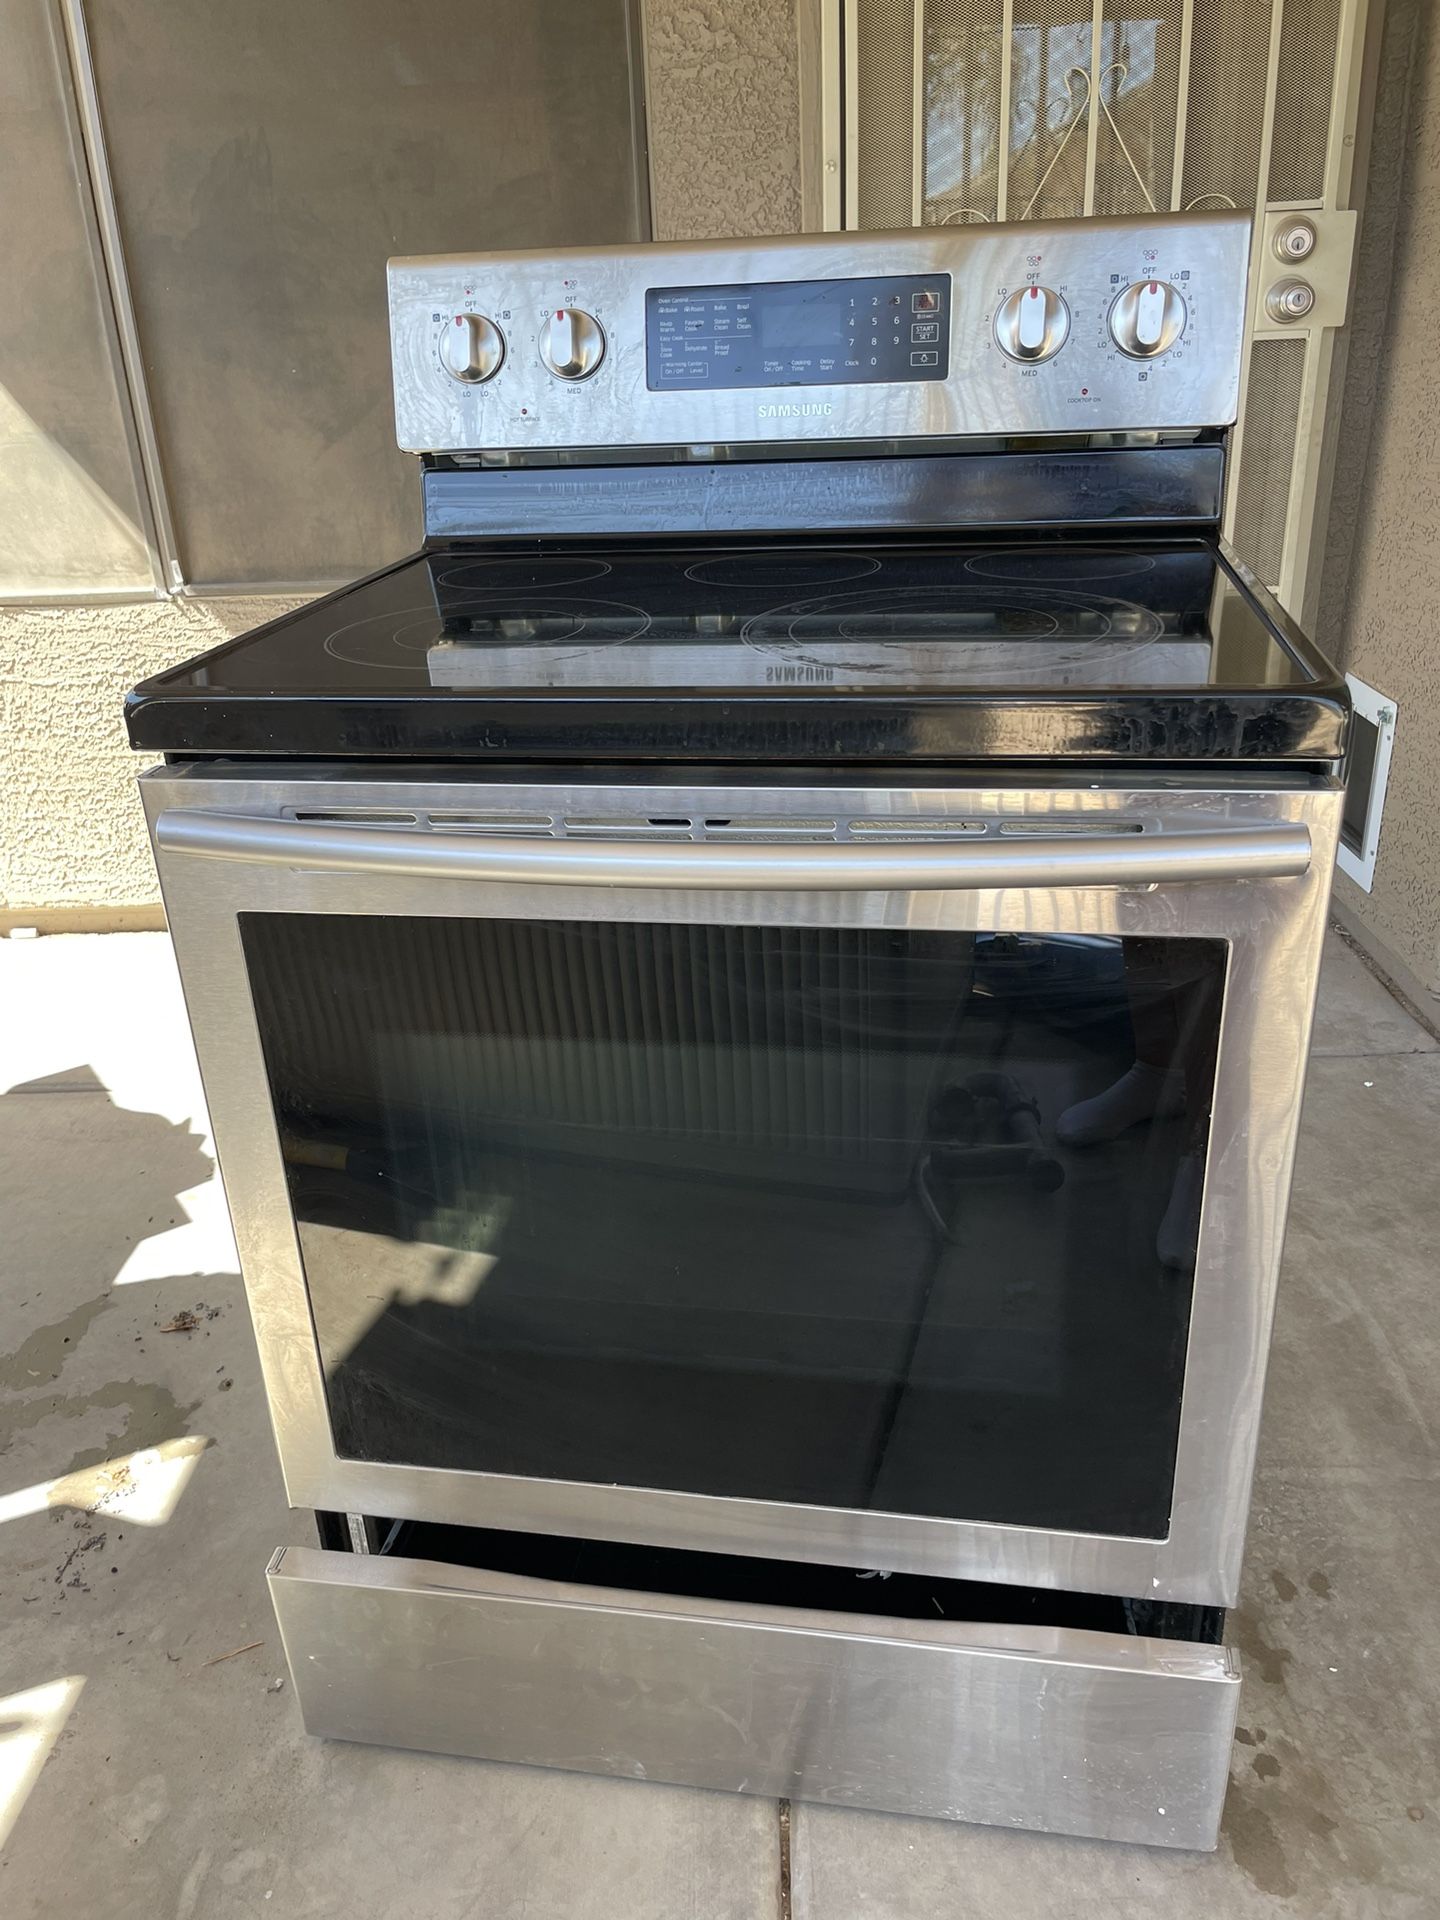 Samsung Electric Stove And Microwave 